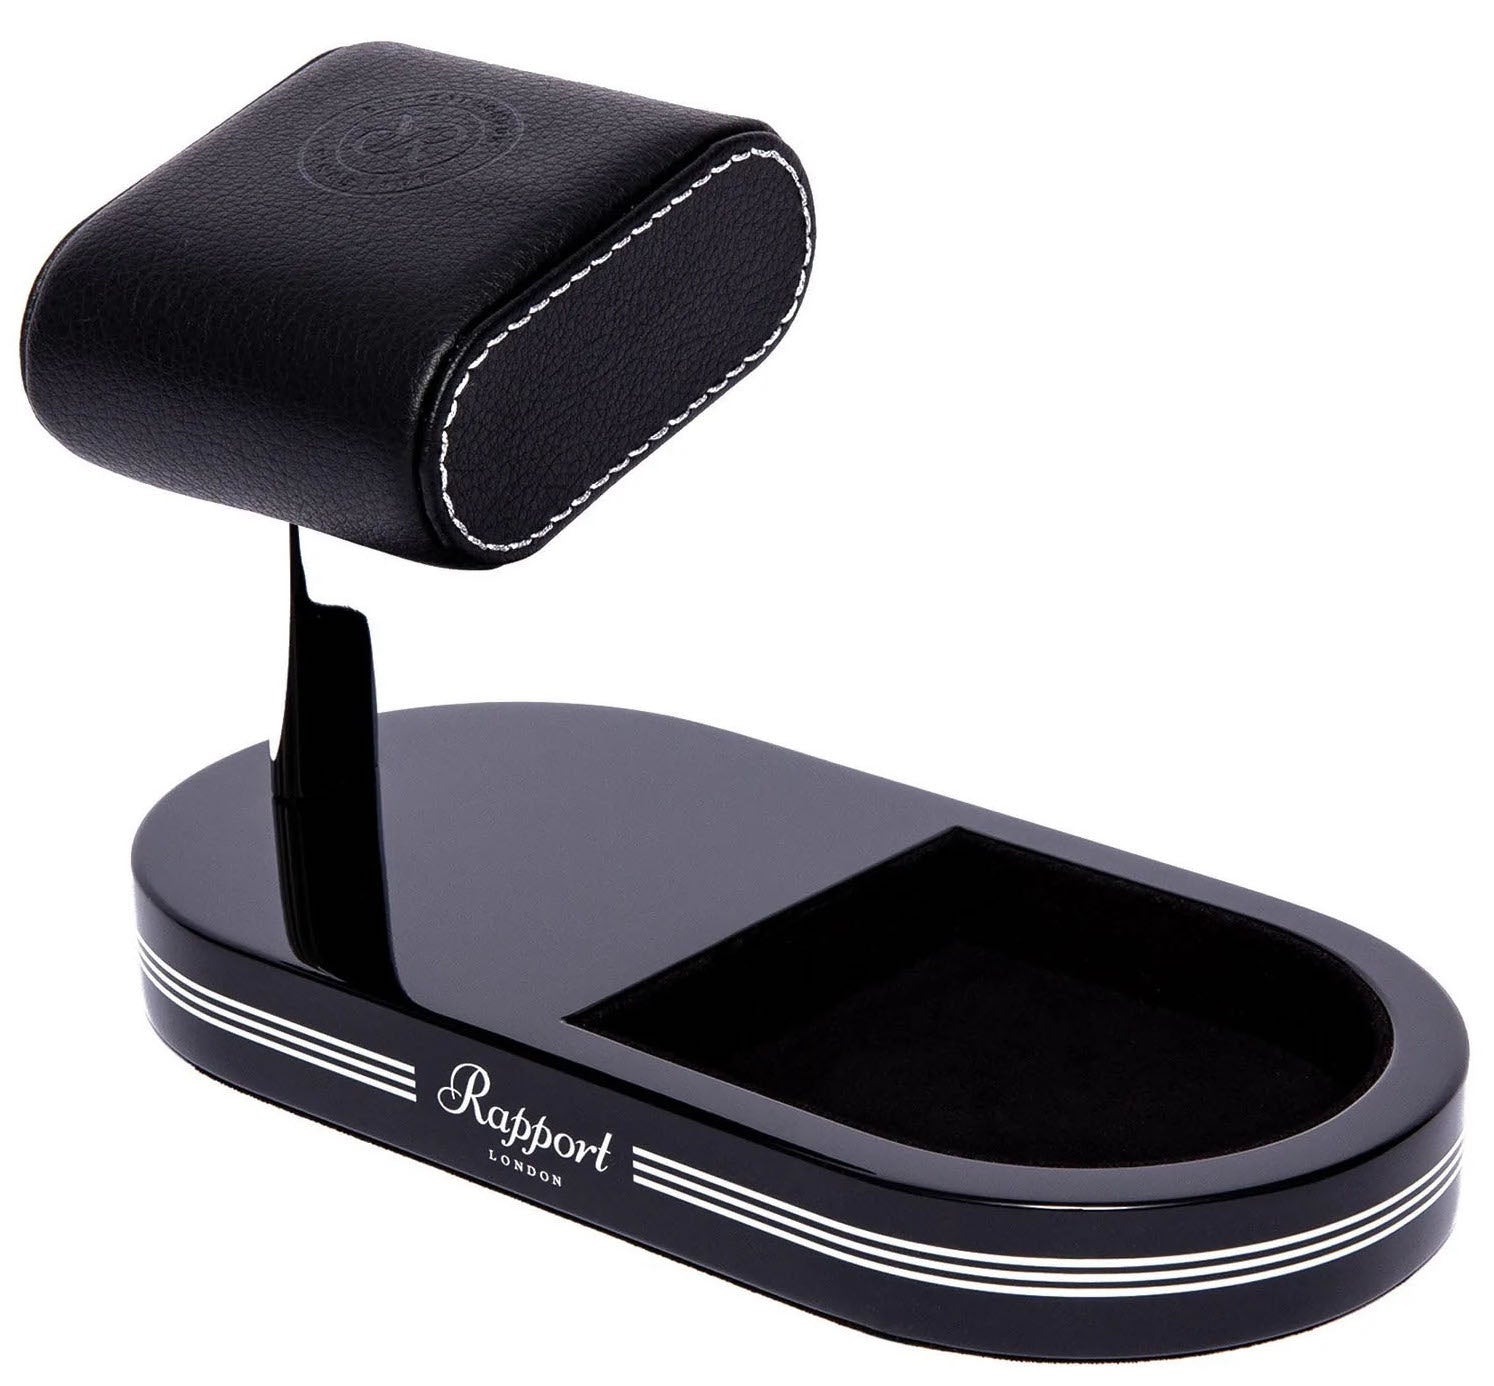 Rapport Watch Stand Formula Single With Tray Black Silver - Black